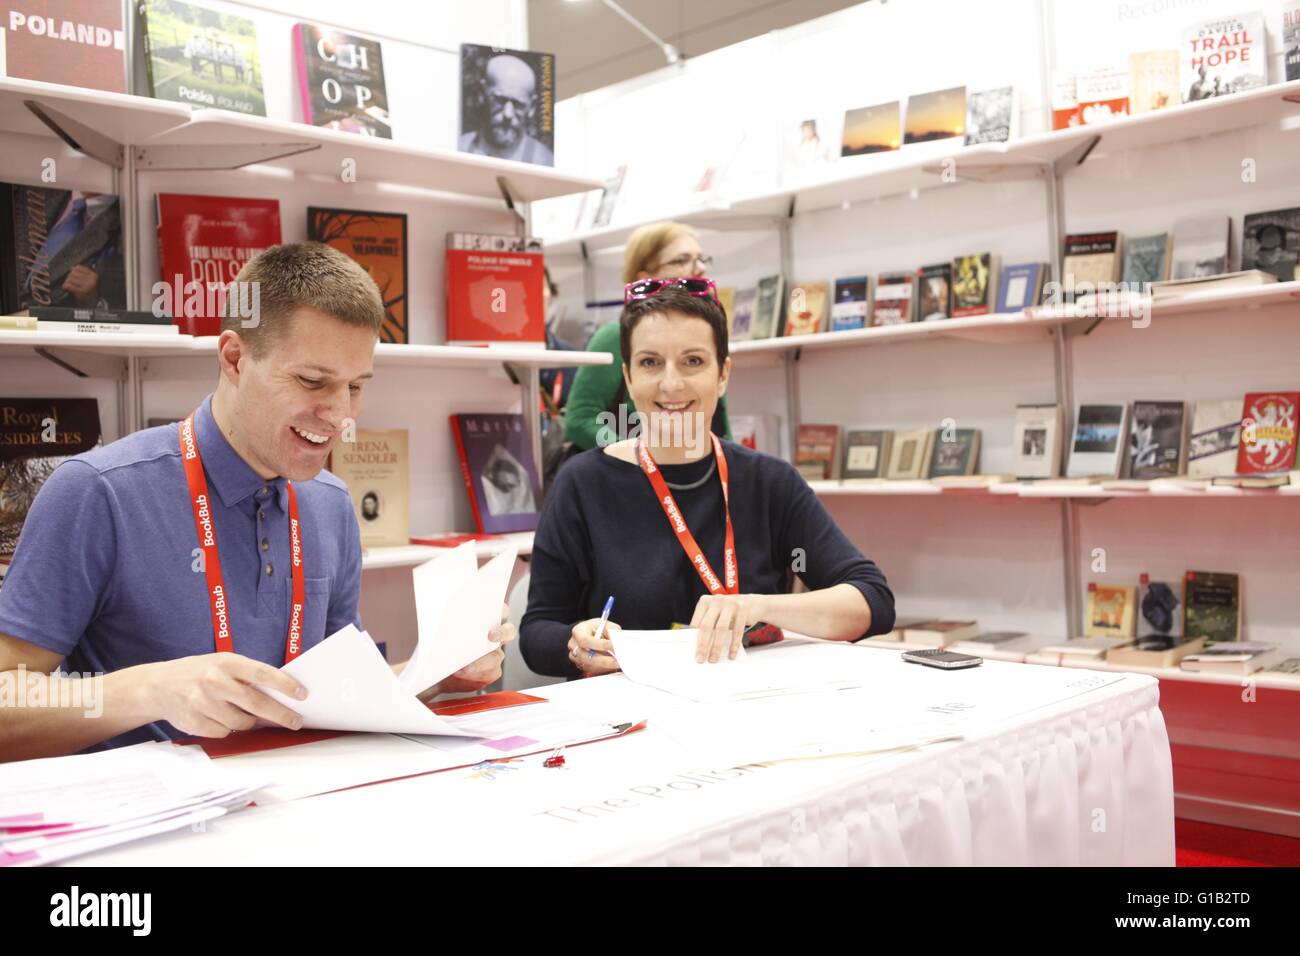 Chicago, Illinois, USA. 11th May, 2016. Literature and Humanities programmer, Sean Bye, and Director of the Polish Cultural Institute New York, Agata Grenda, at the Polish booth for BookExpo America 2016, where Poland is the Country of Honor Credit:  David A. Goldfarb/Alamy Live News Stock Photo